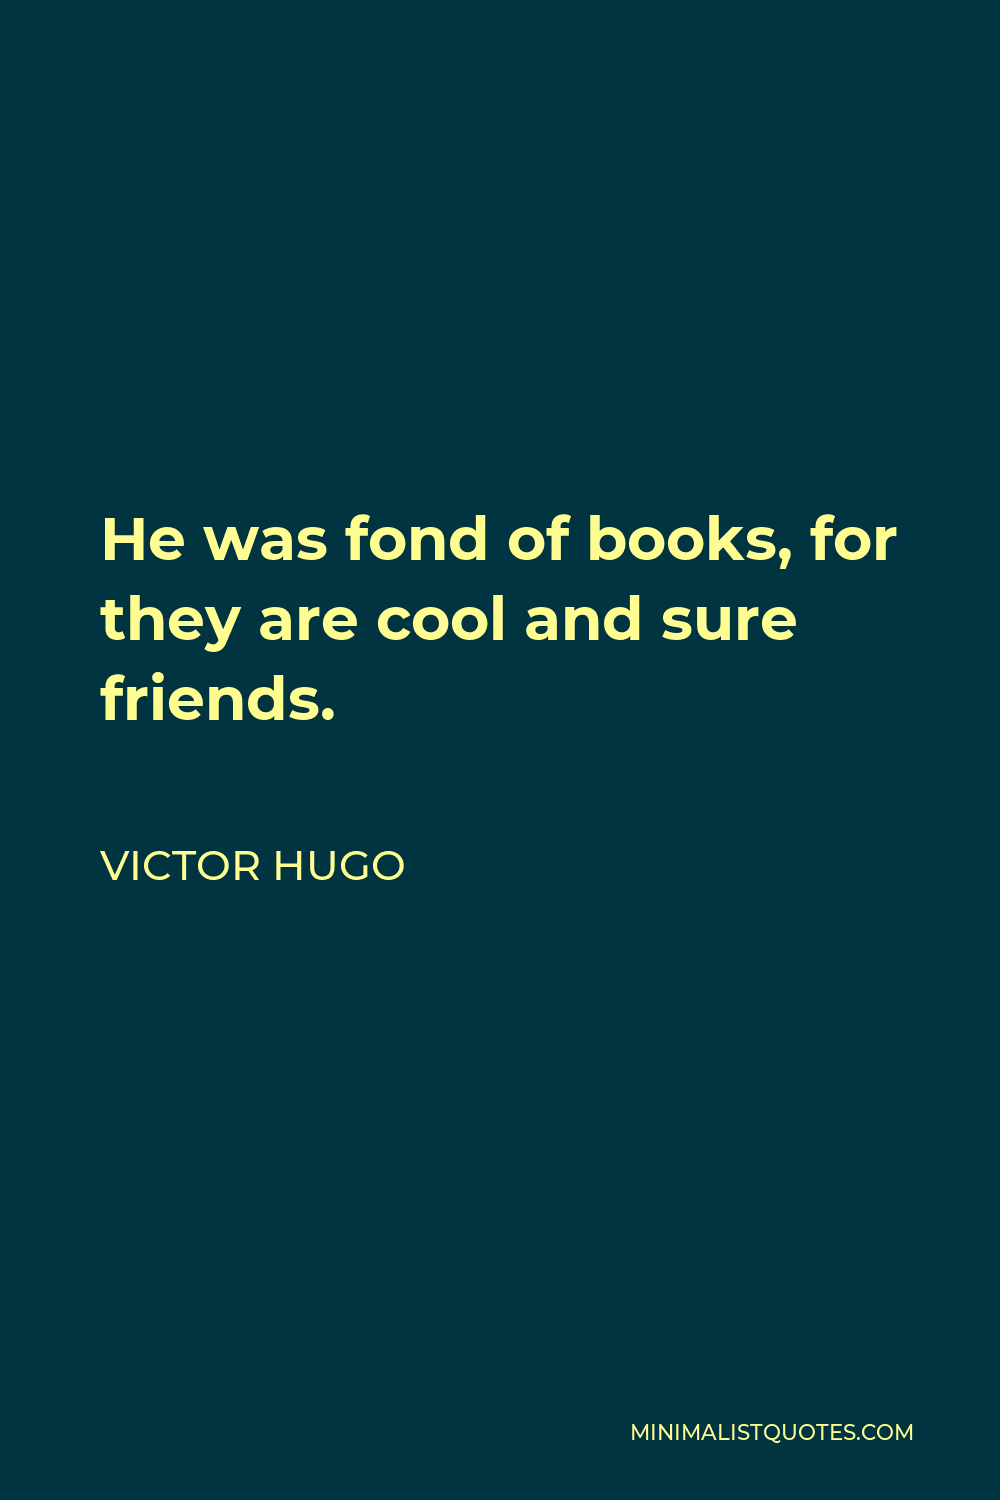 Victor Hugo Quote - He was fond of books, for they are cool and sure friends.